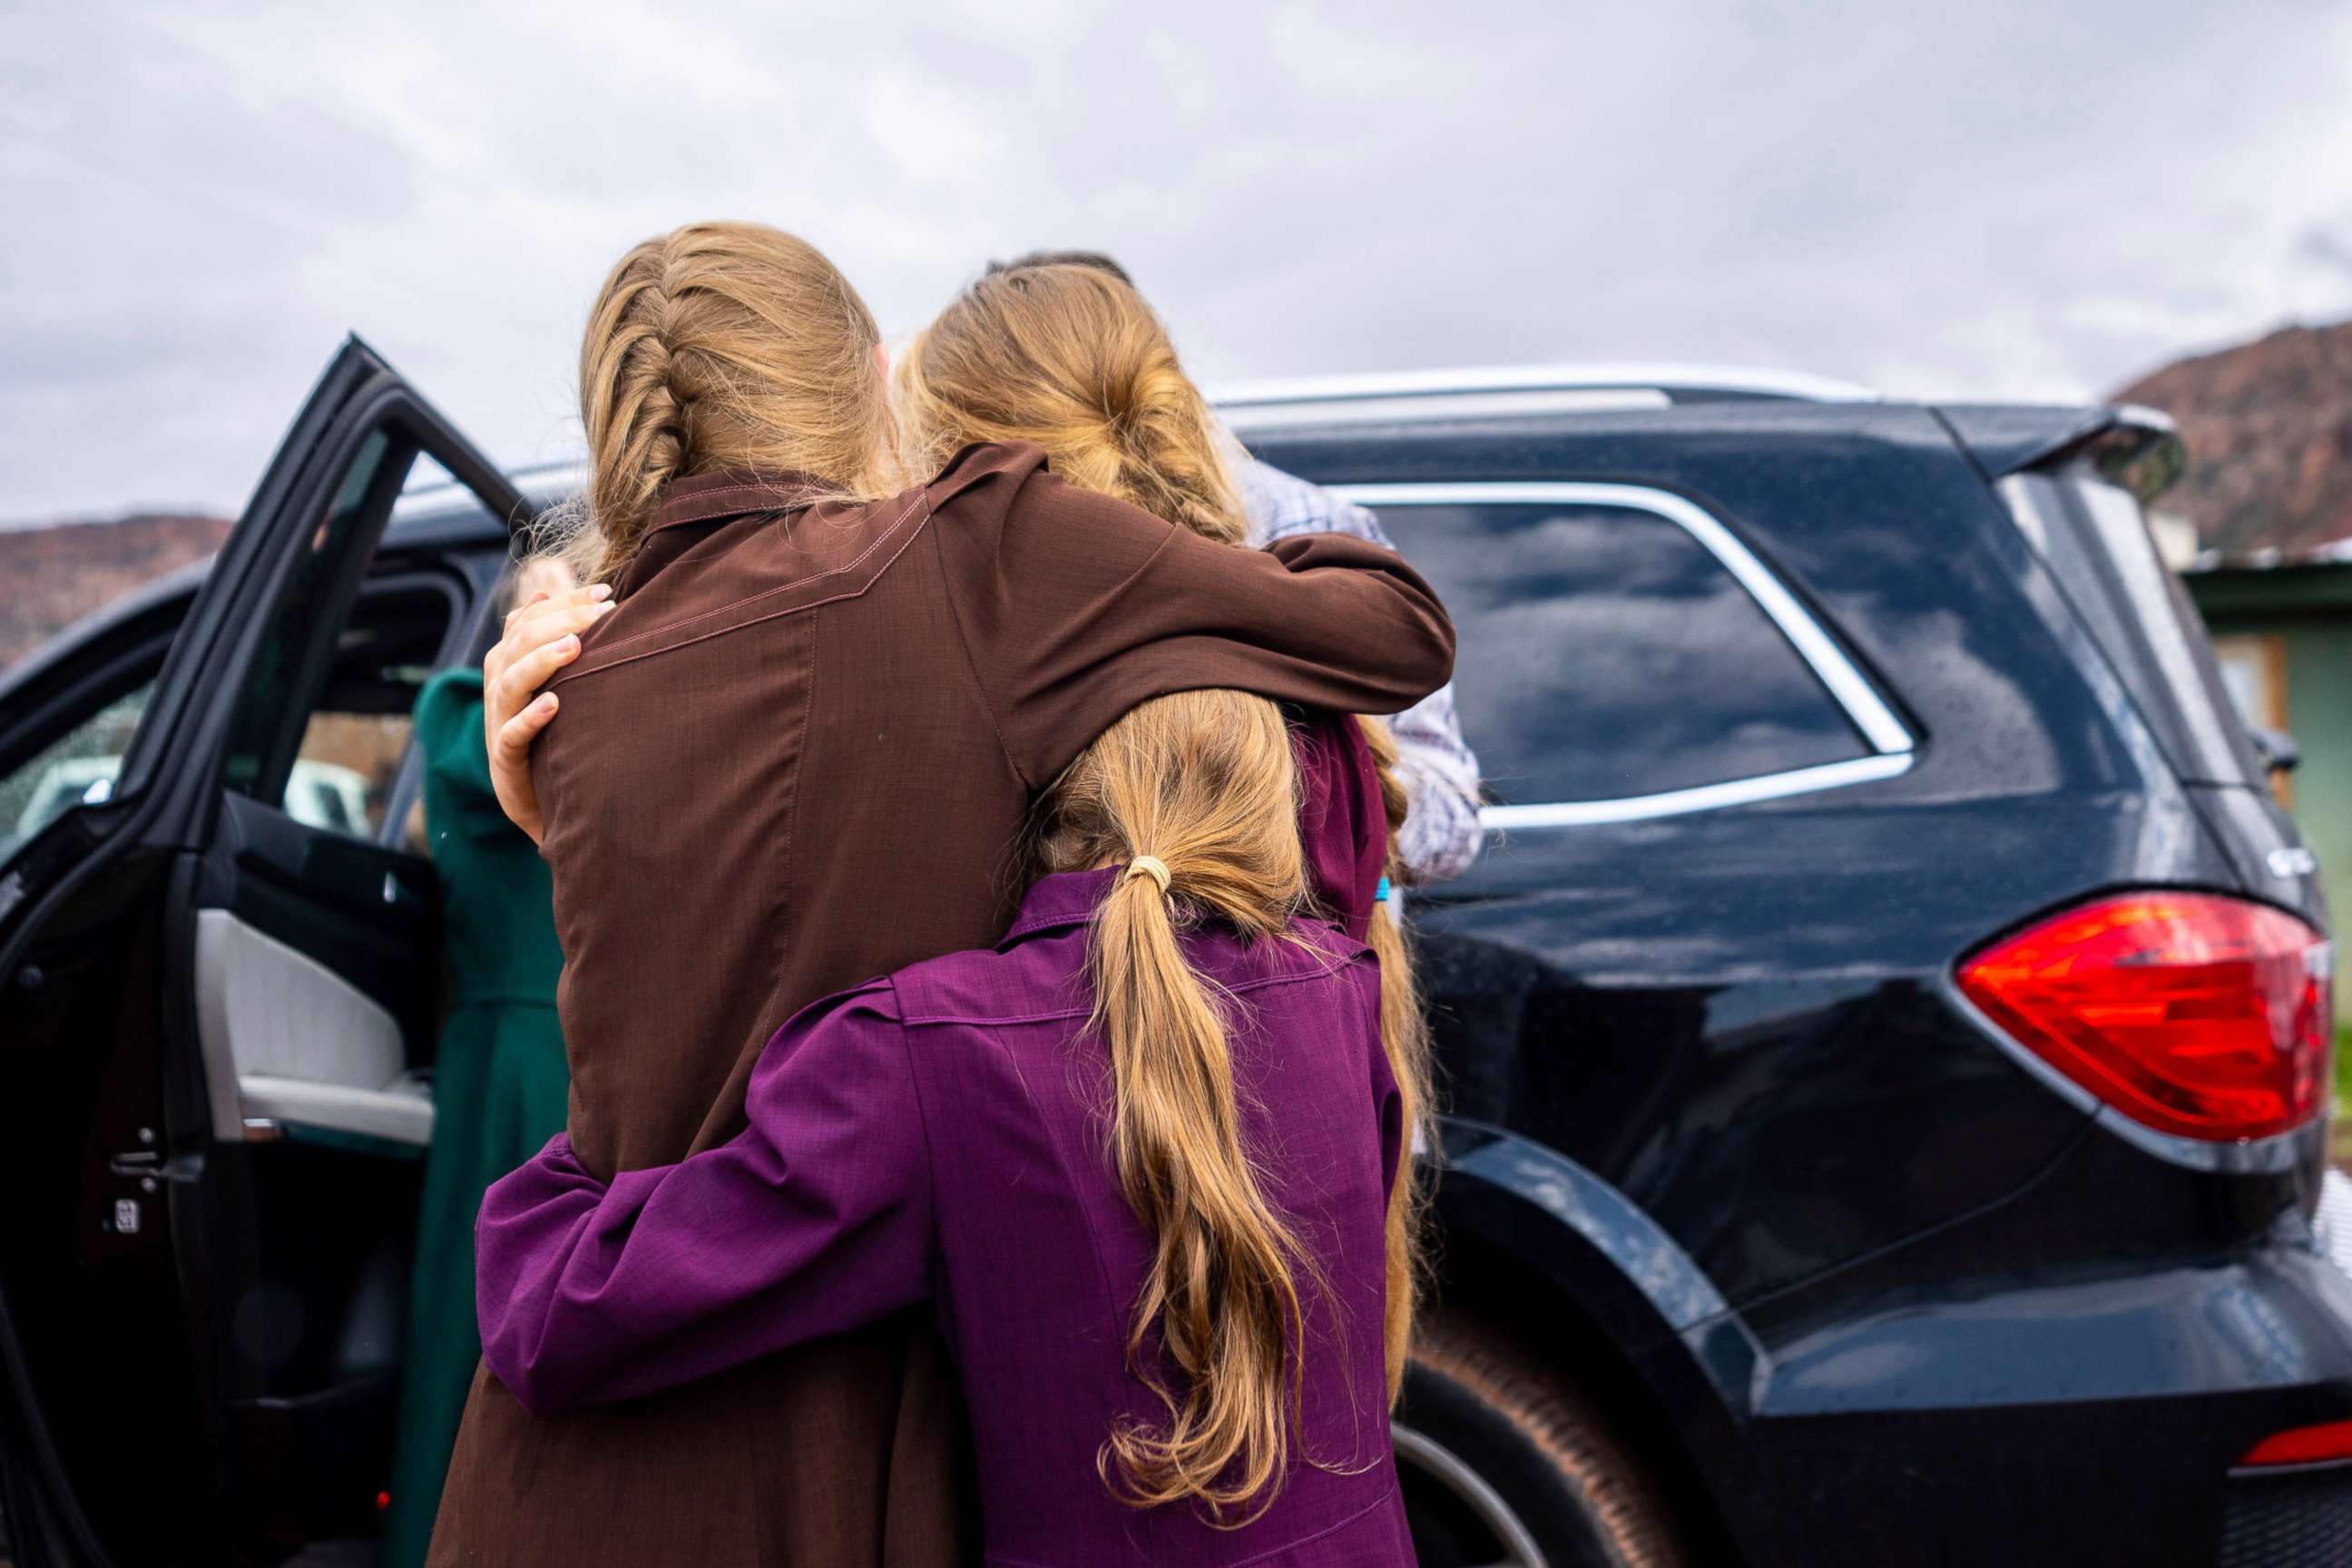 PHOTO: In this Sept. 14, 2022, file photo, three girls embrace before they are removed from the home of Samuel Bateman, following his arrest in Colorado City, Ariz.